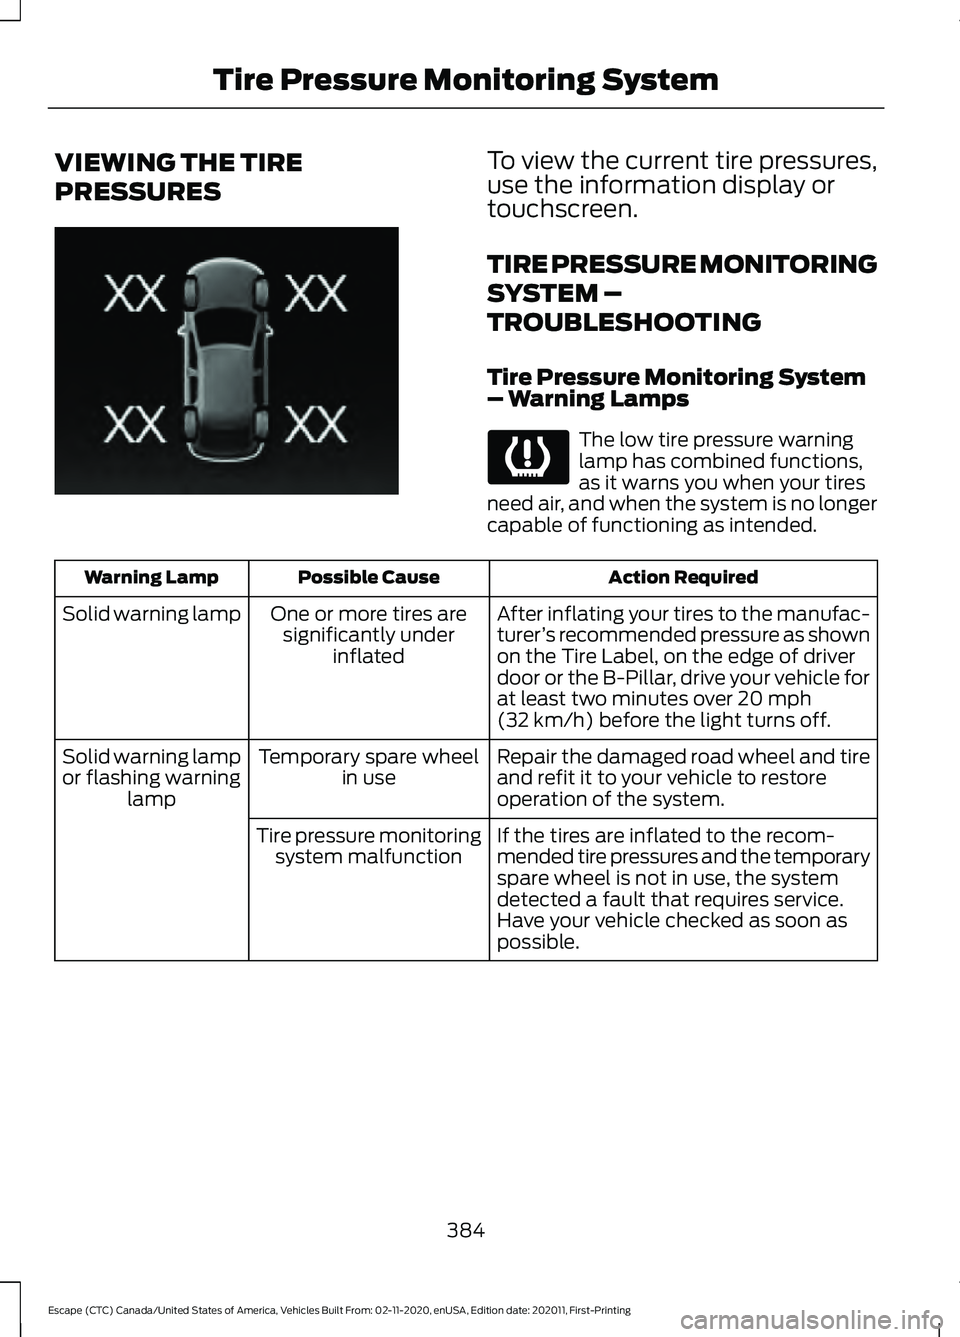 FORD ESCAPE 2021 User Guide VIEWING THE TIRE
PRESSURES To view the current tire pressures,
use the information display or
touchscreen.
TIRE PRESSURE MONITORING
SYSTEM –
TROUBLESHOOTING
Tire Pressure Monitoring System
– Warni